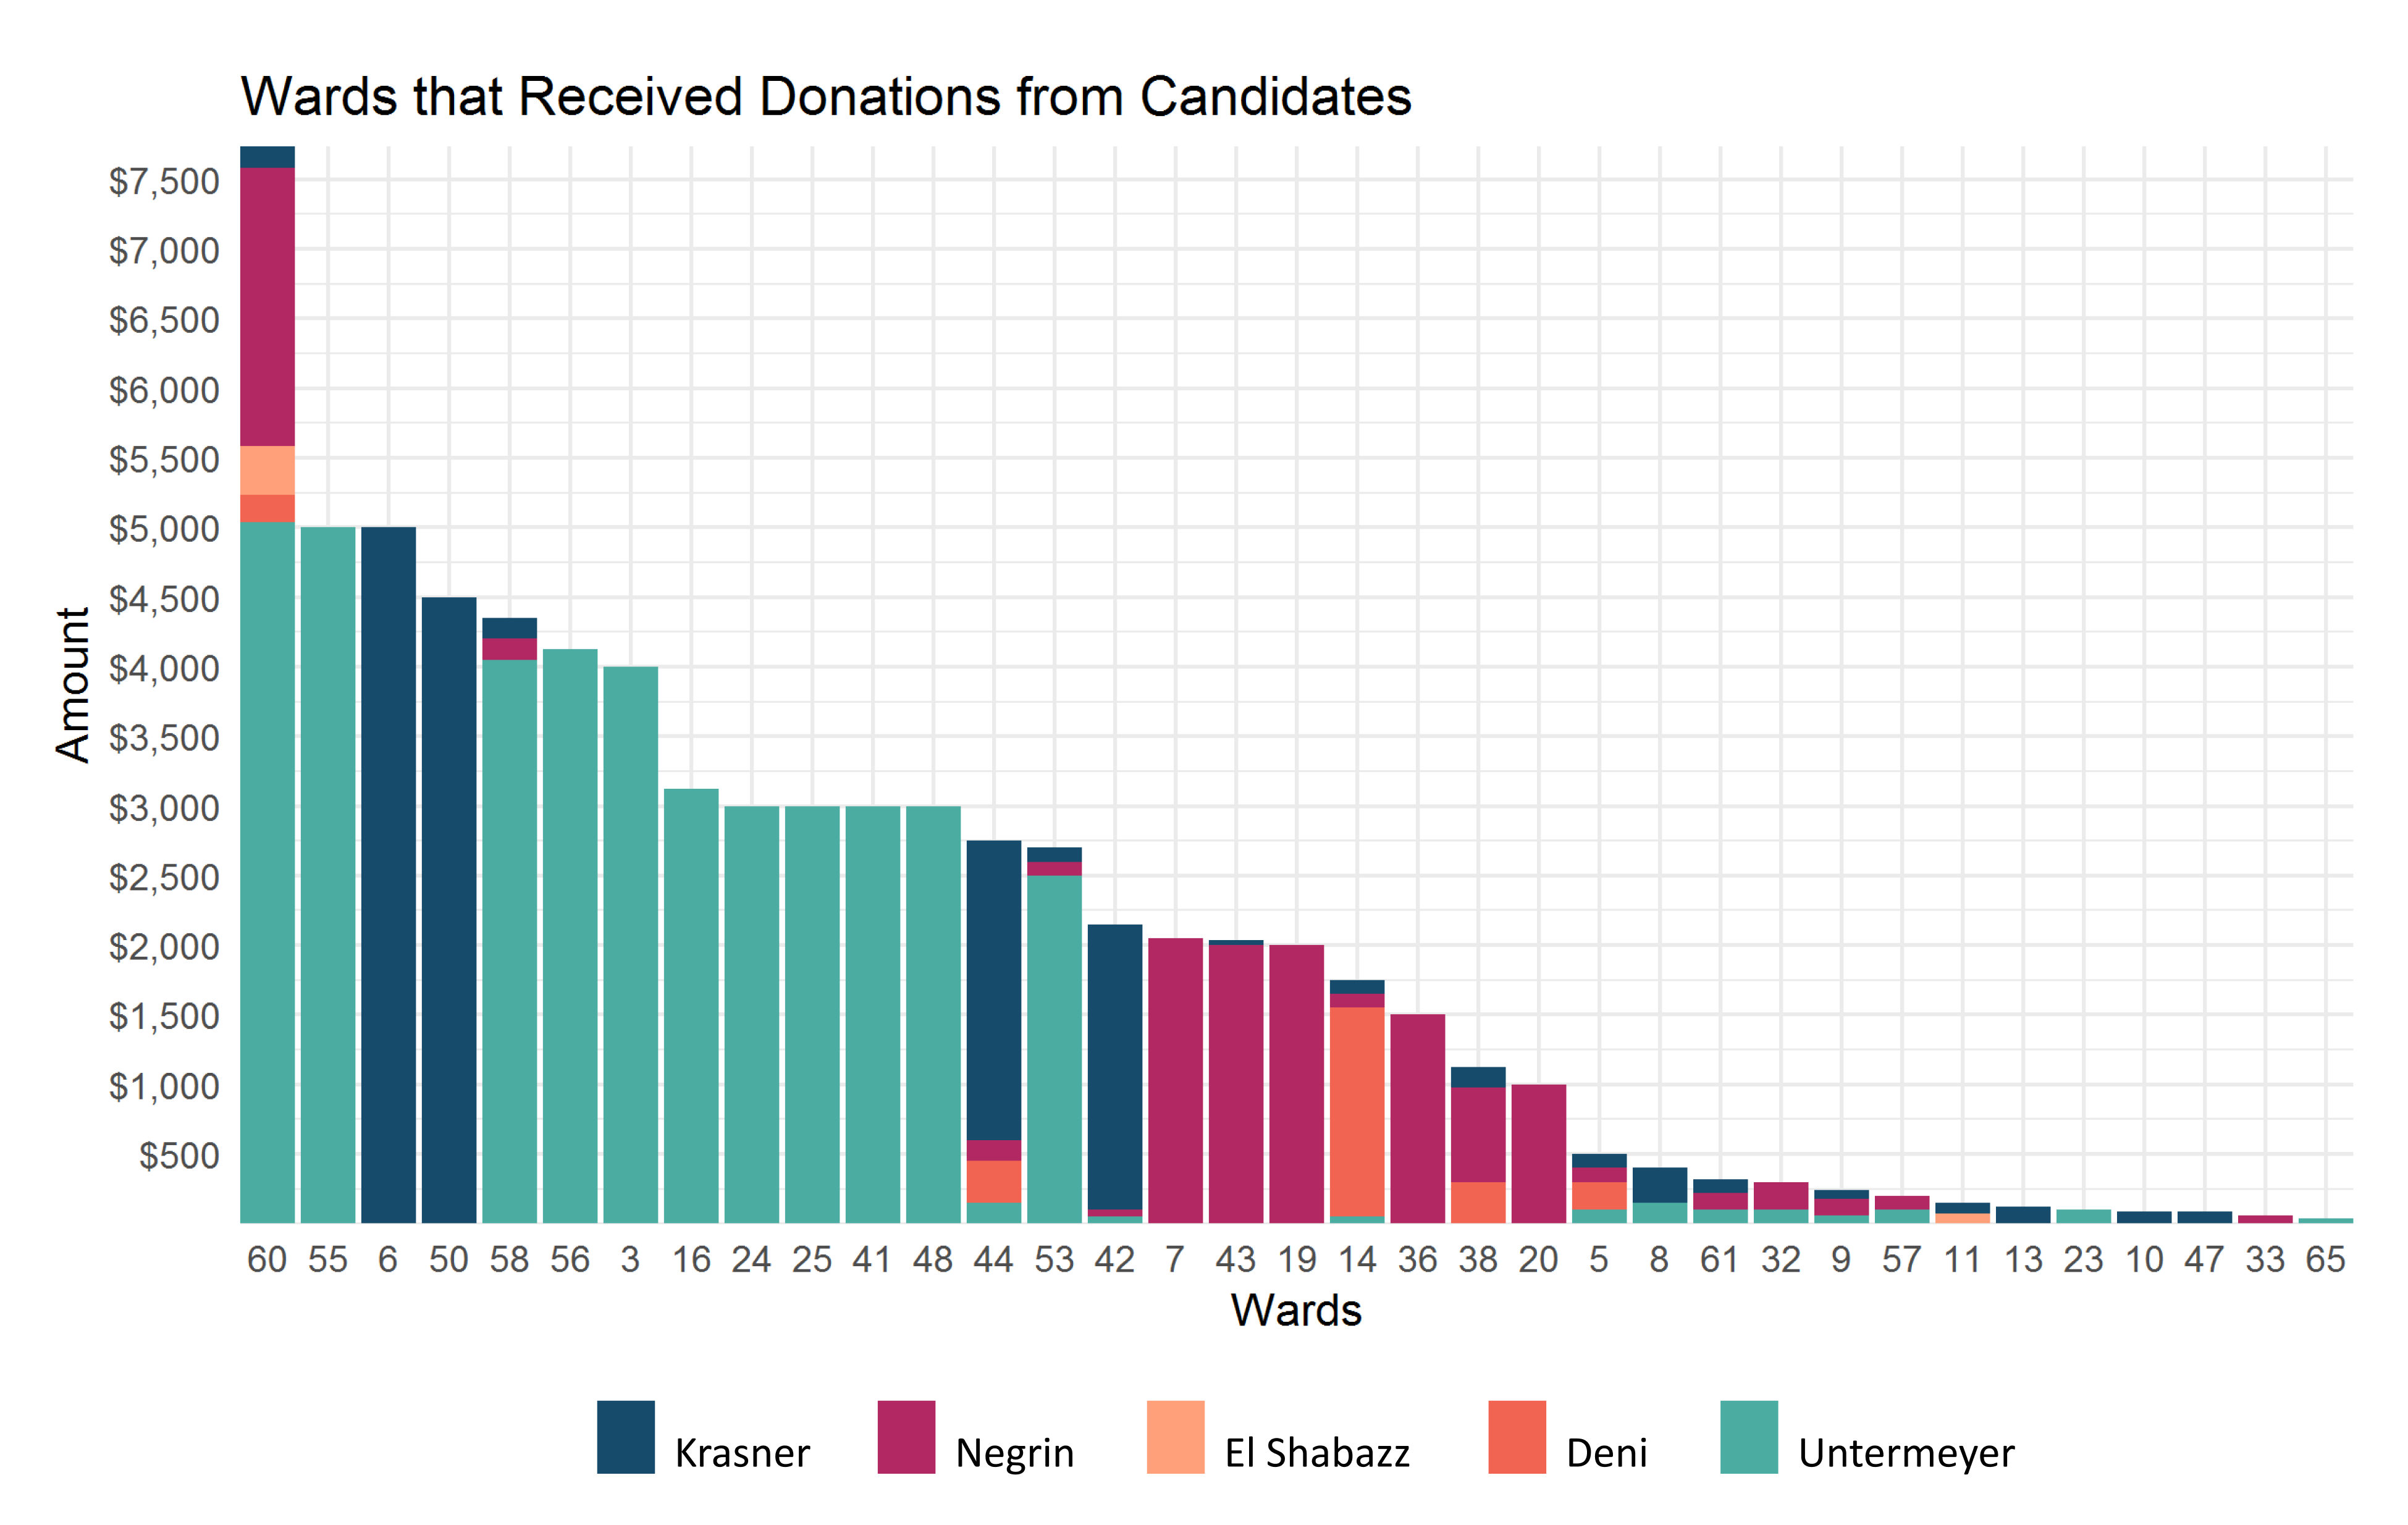 Wards that received donations from candidates